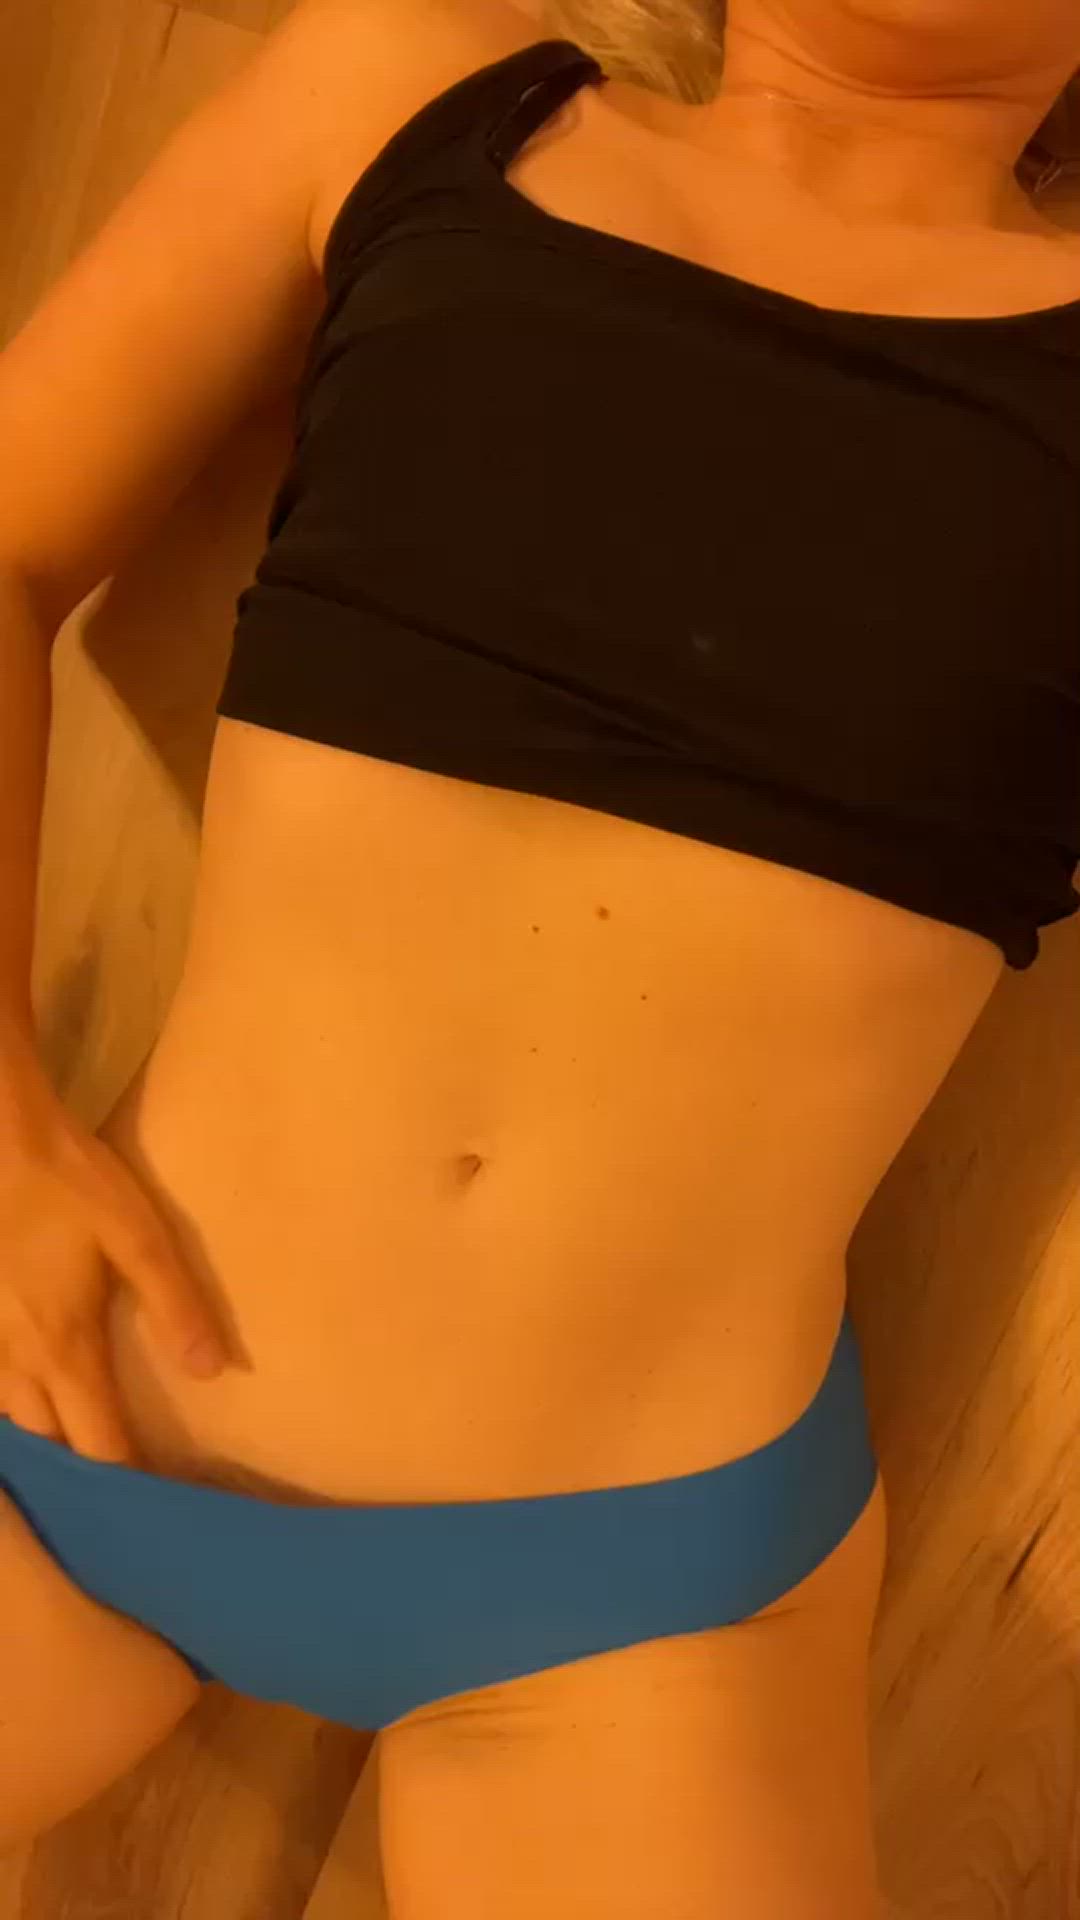 Amateur porn video with onlyfans model submissiveblonde69 <strong>@obedientsub69</strong>